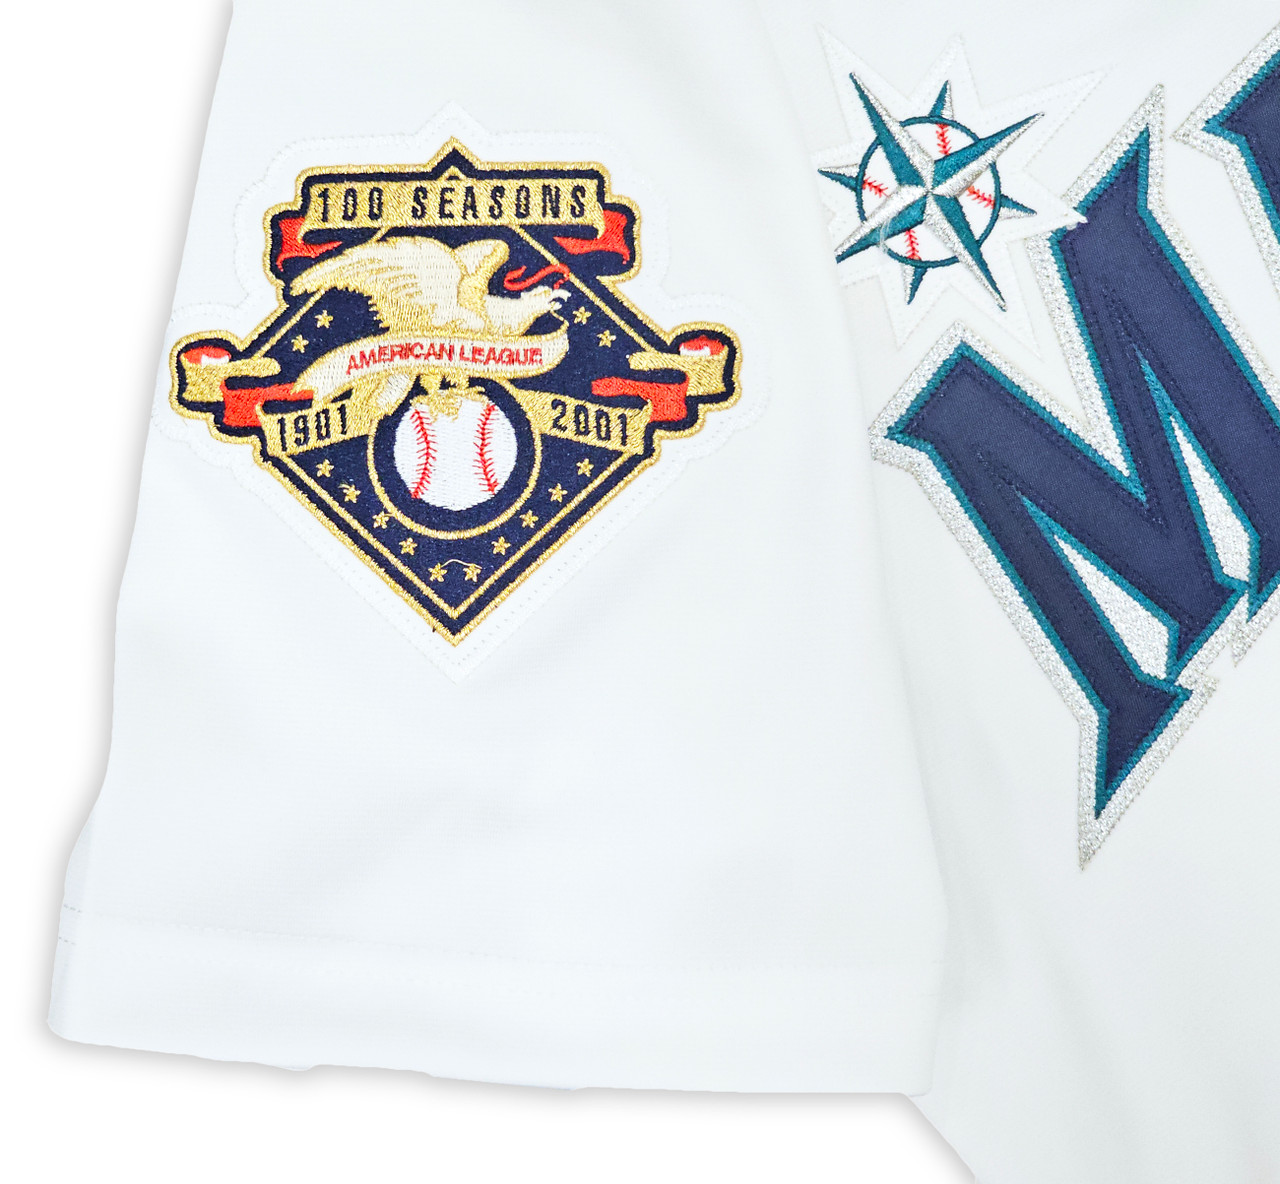 Seattle Mariners Ichiro Suzuki Autographed White Authentic Mitchell & Ness  2001 All Star Patch Jersey Size 48 01 ROY/MVP IS Holo Stock #217974